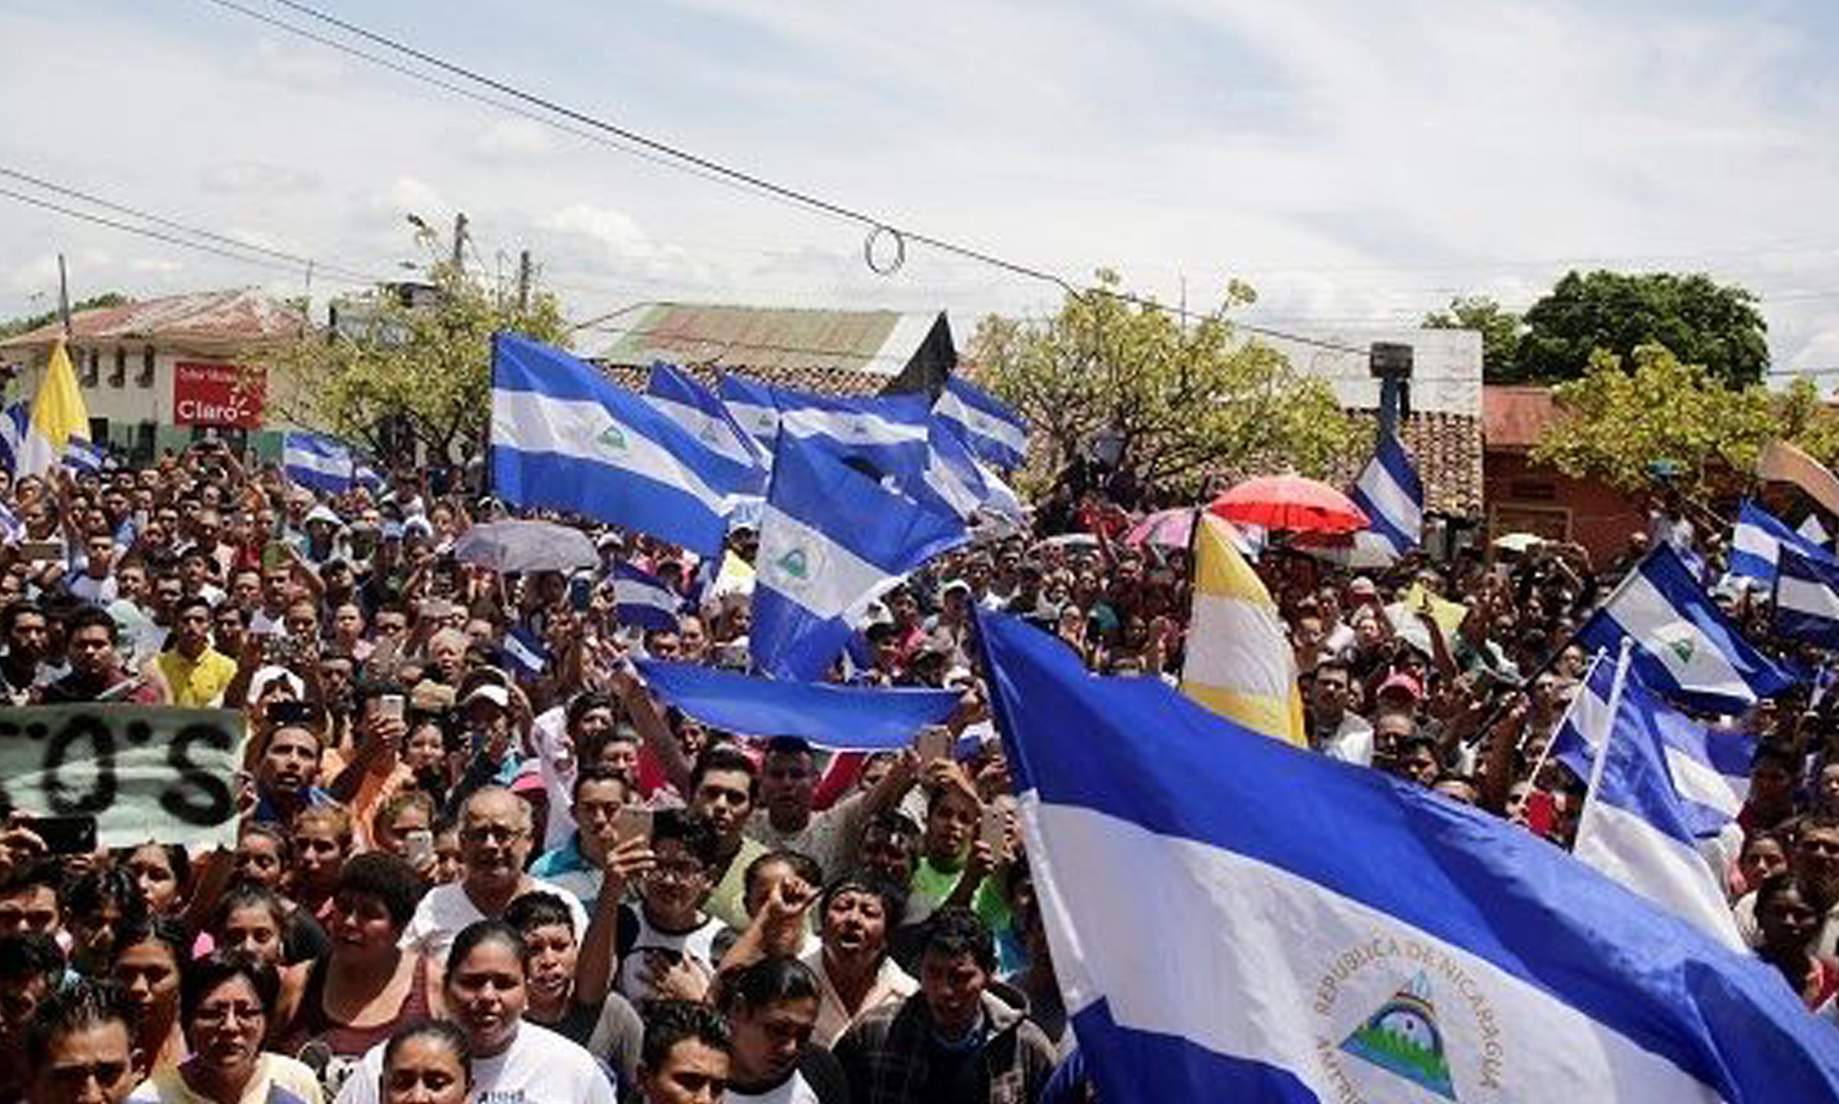 Nicaragua: Two opposition leaders sentenced to ‘unprecedented’ 200 years over protests